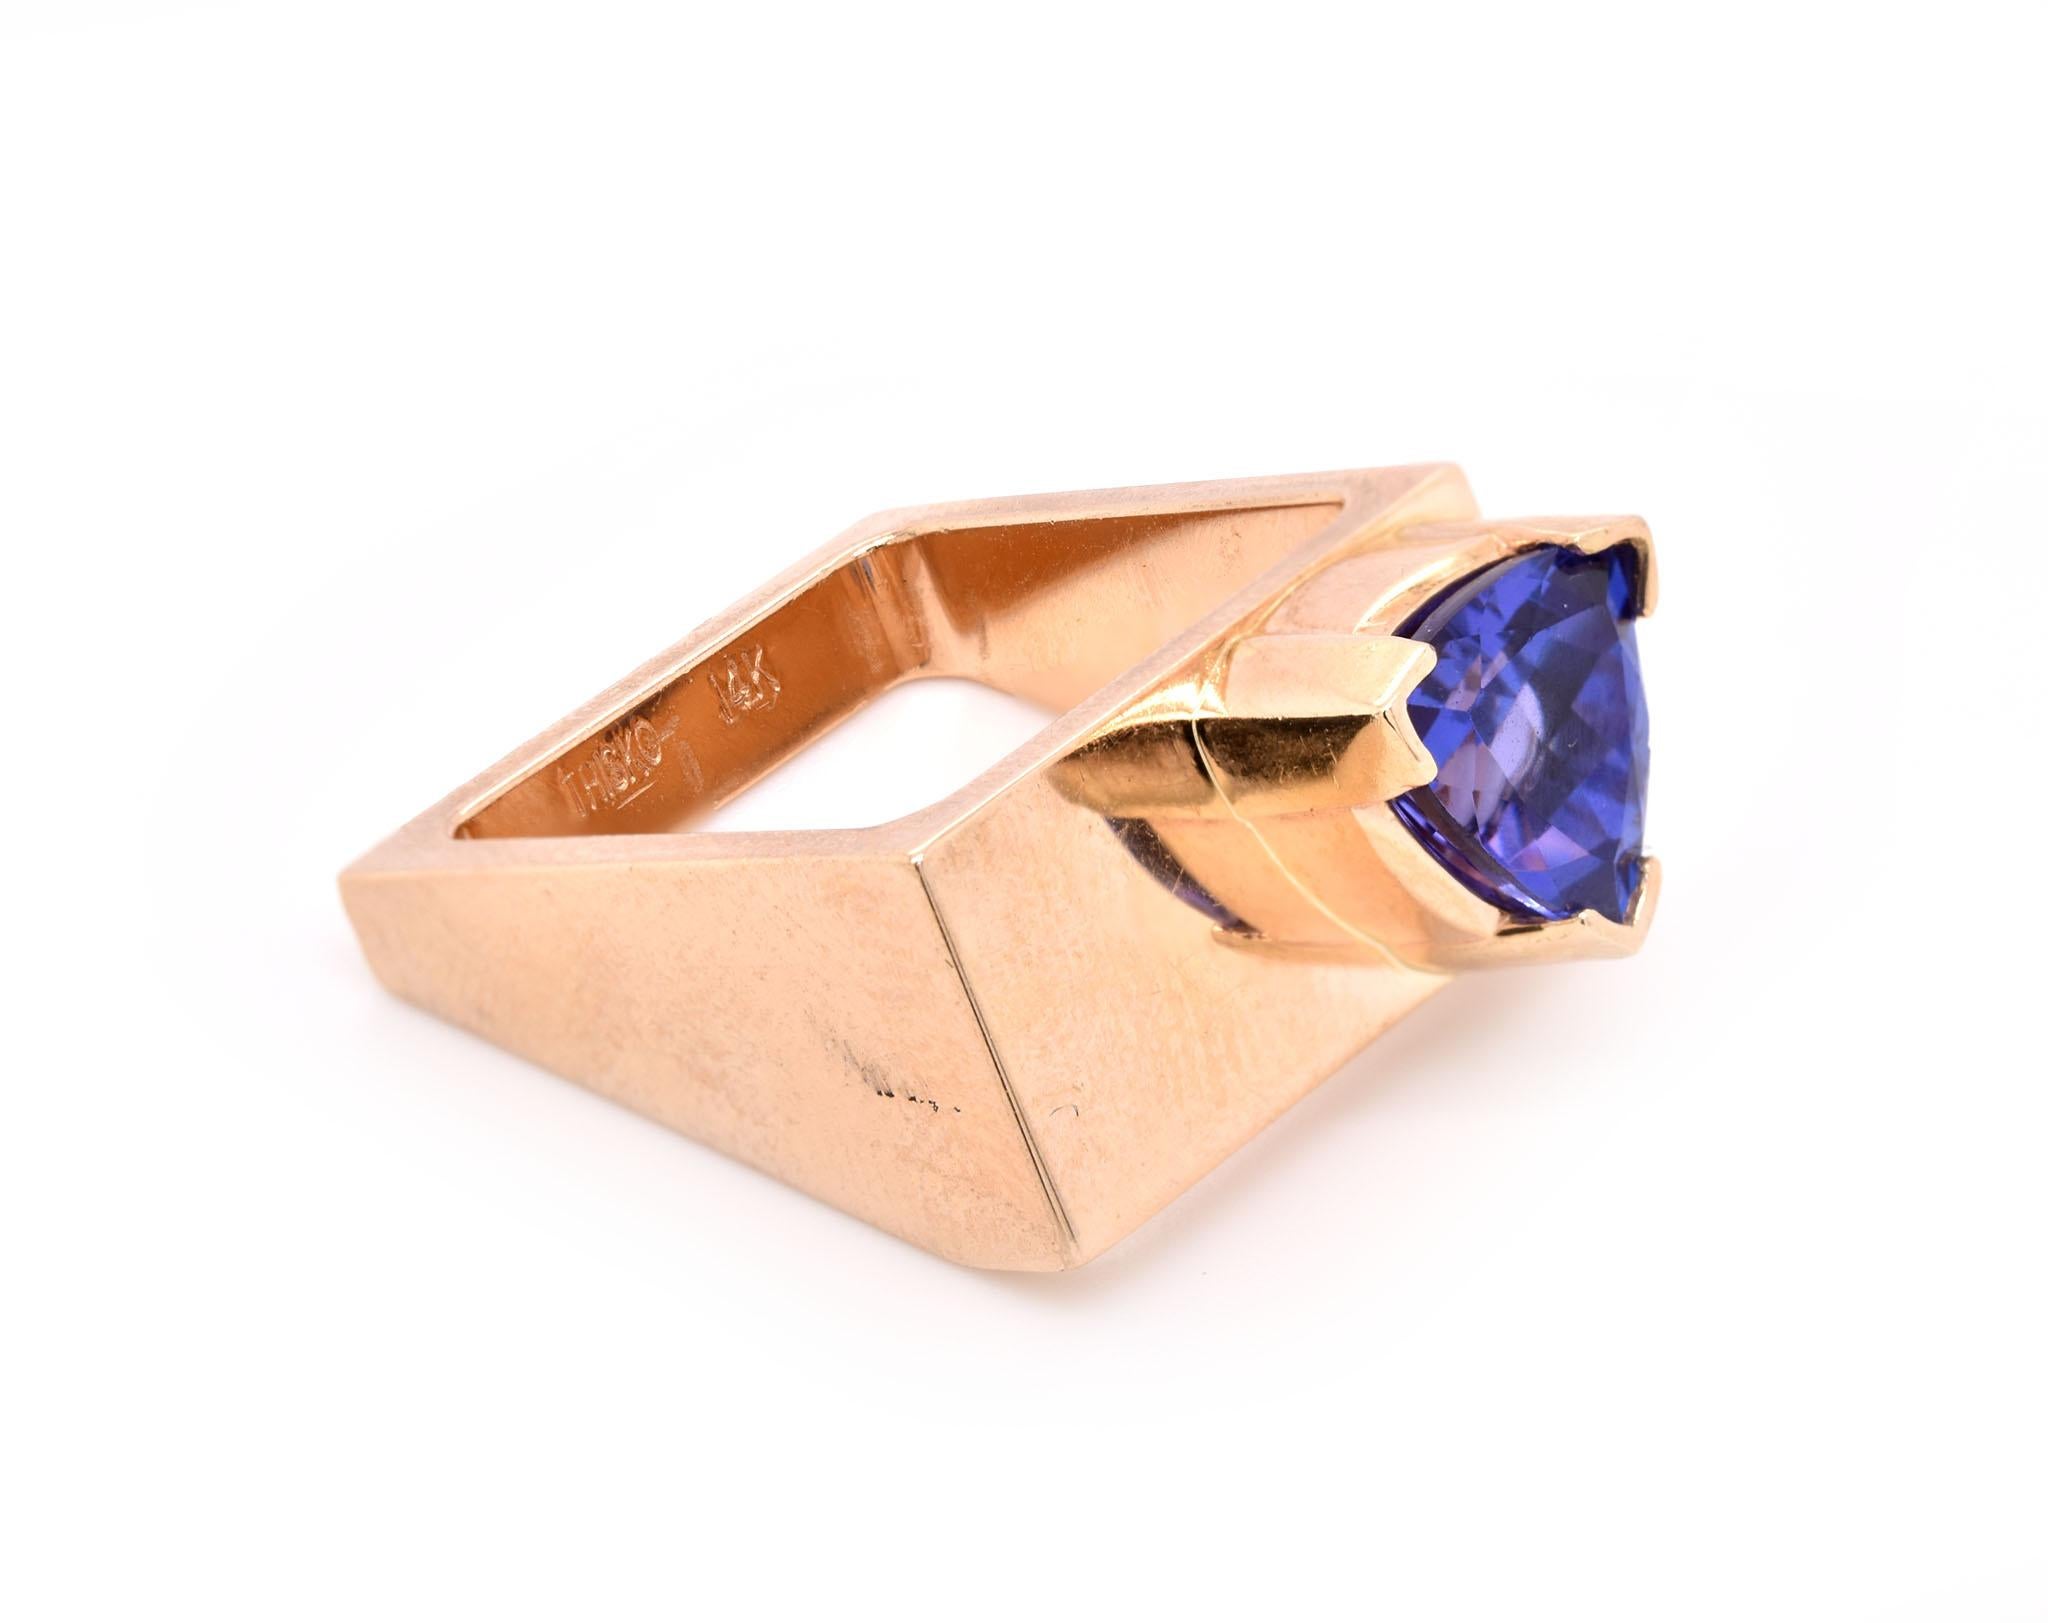 Designer: Trisko
Material: 14K yellow gold
Tanzanite: 1 trillion cut = 1.50ct
Size: 5.25 (please allow two additional days for sizing)
Weight: 12.16 grams